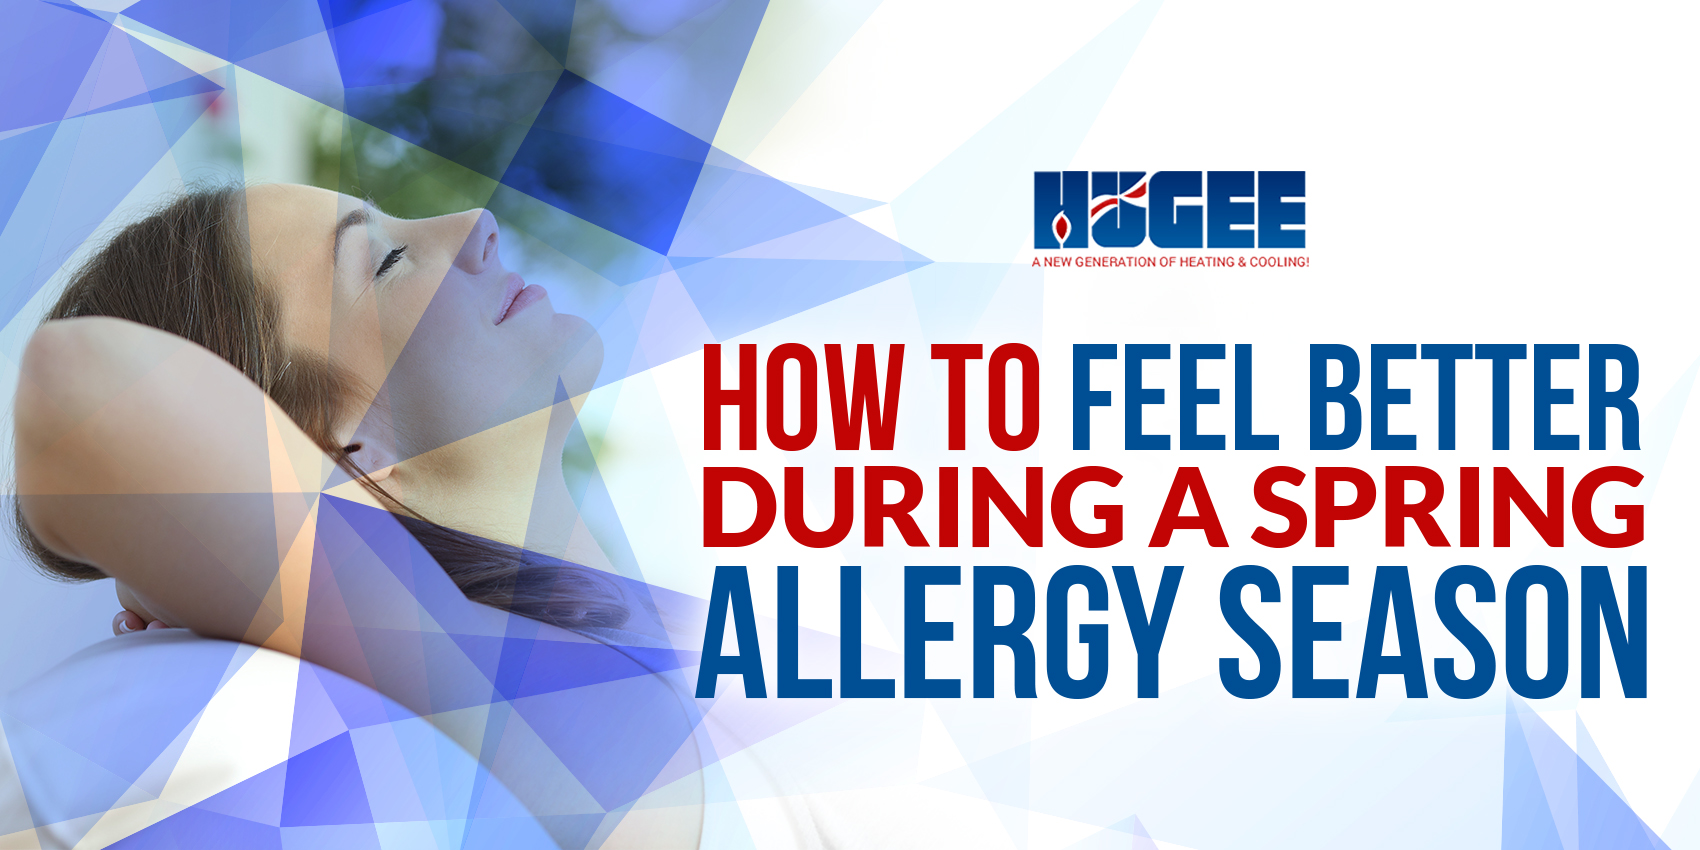 How To Feel Better During a Spring Allergy Season